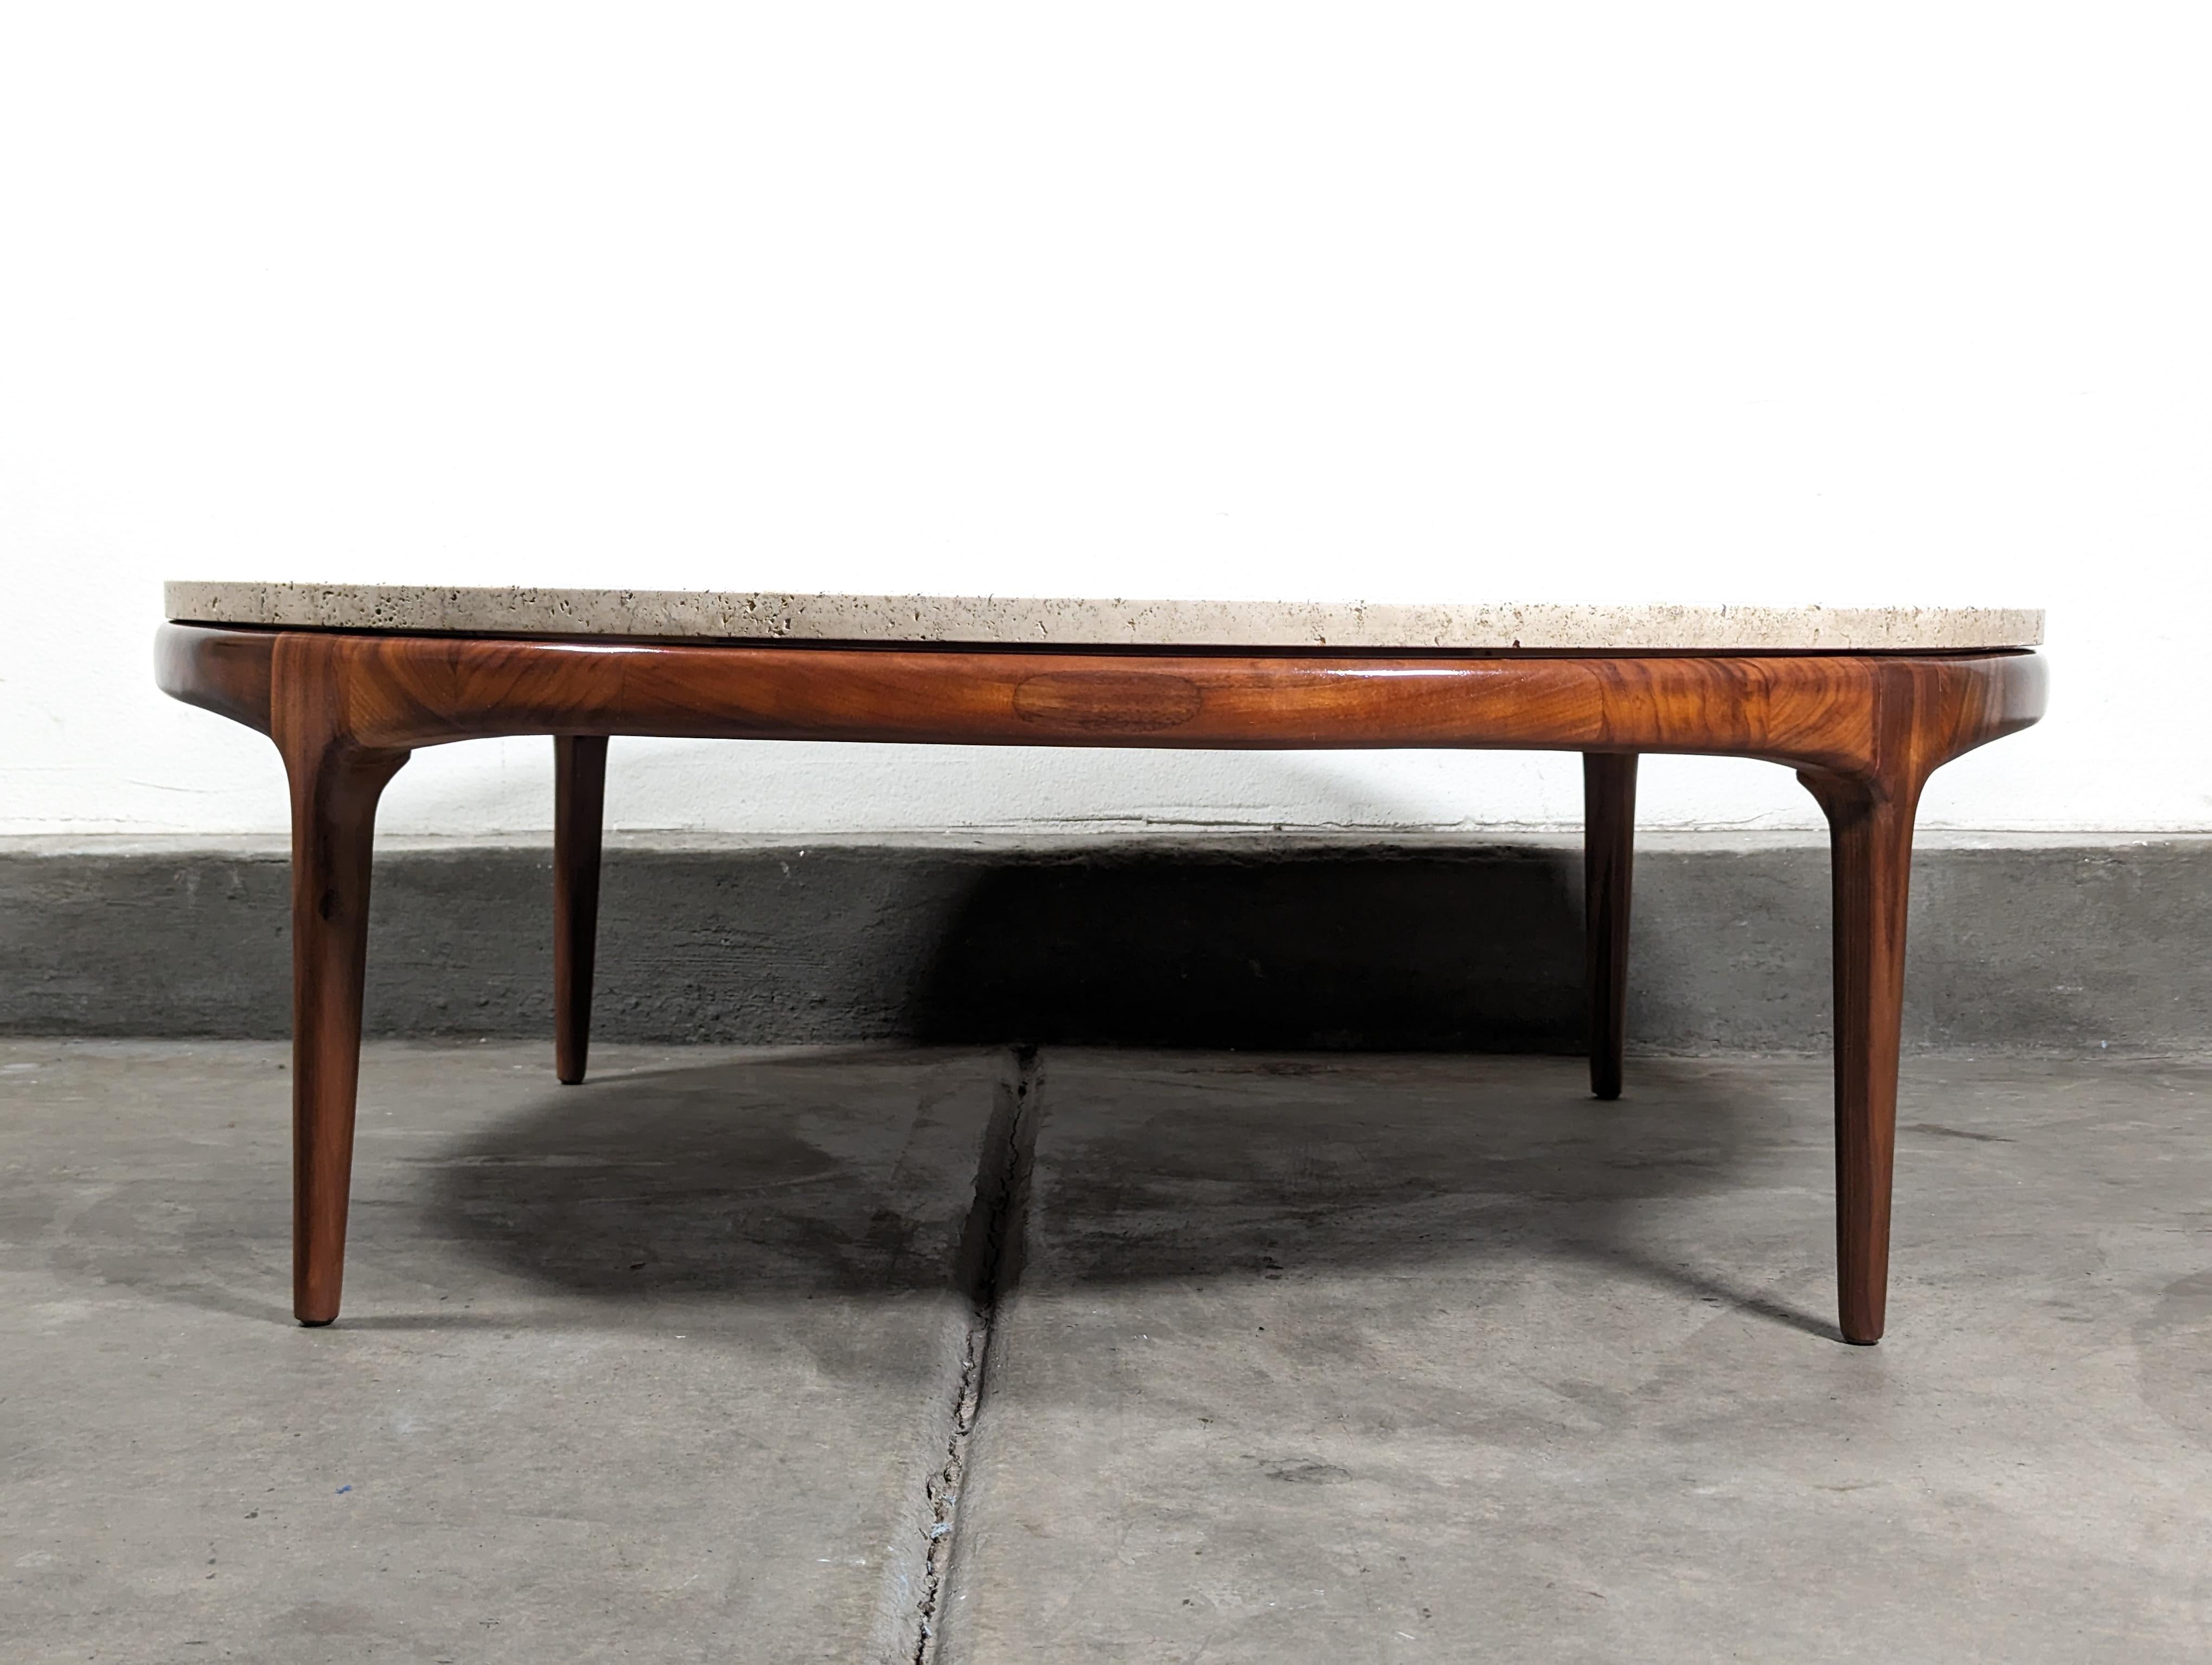 We present to you an exquisite piece of design history - a vintage mid-century modern coffee table by renowned maker, Lane Furniture, crafted in the 1960s. This timeless piece is built to last, with a solid walnut construction and a distinctive